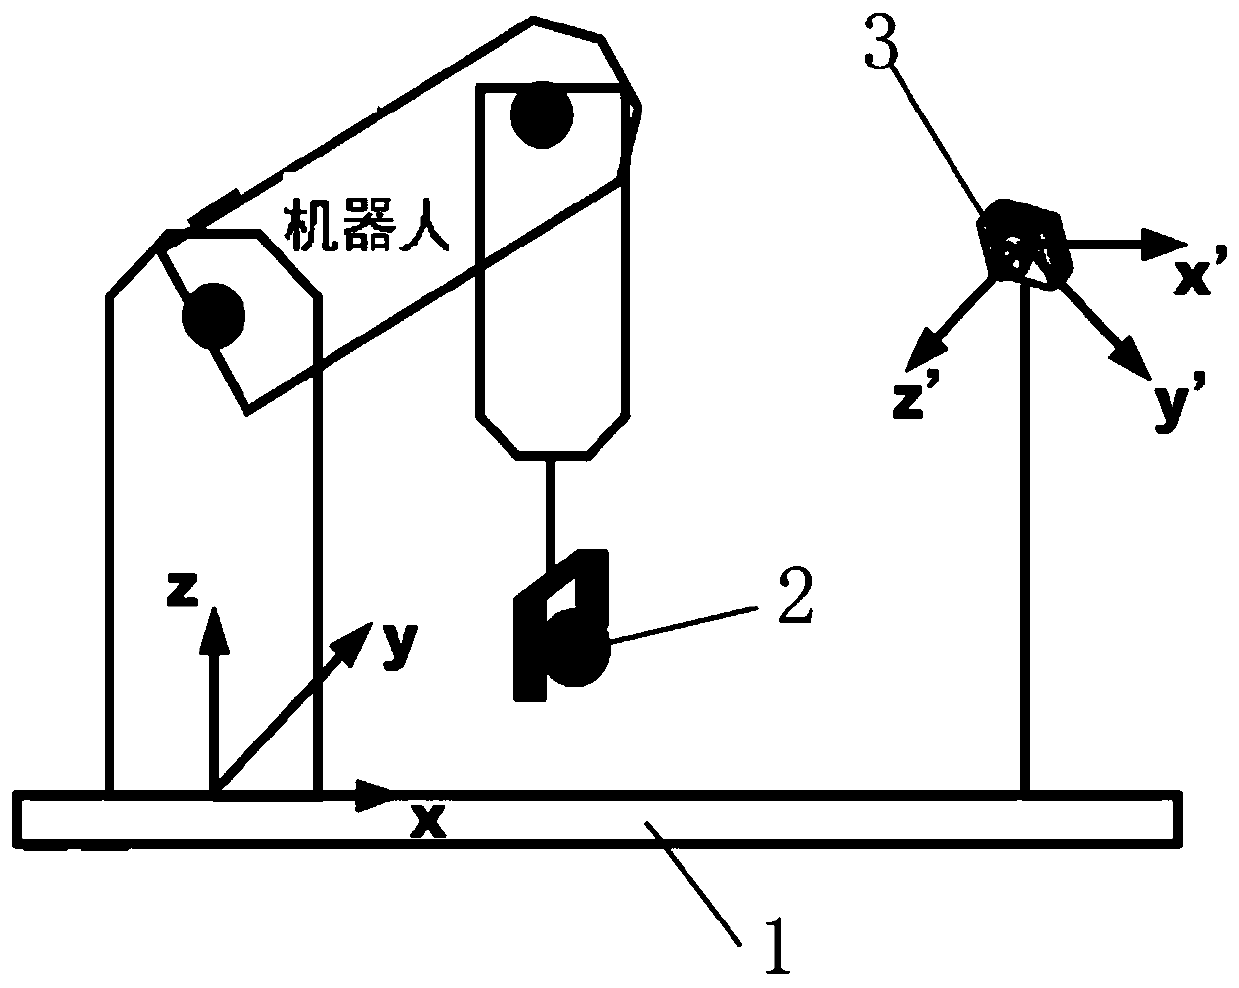 Camera pose calibration method based on spatial point location information